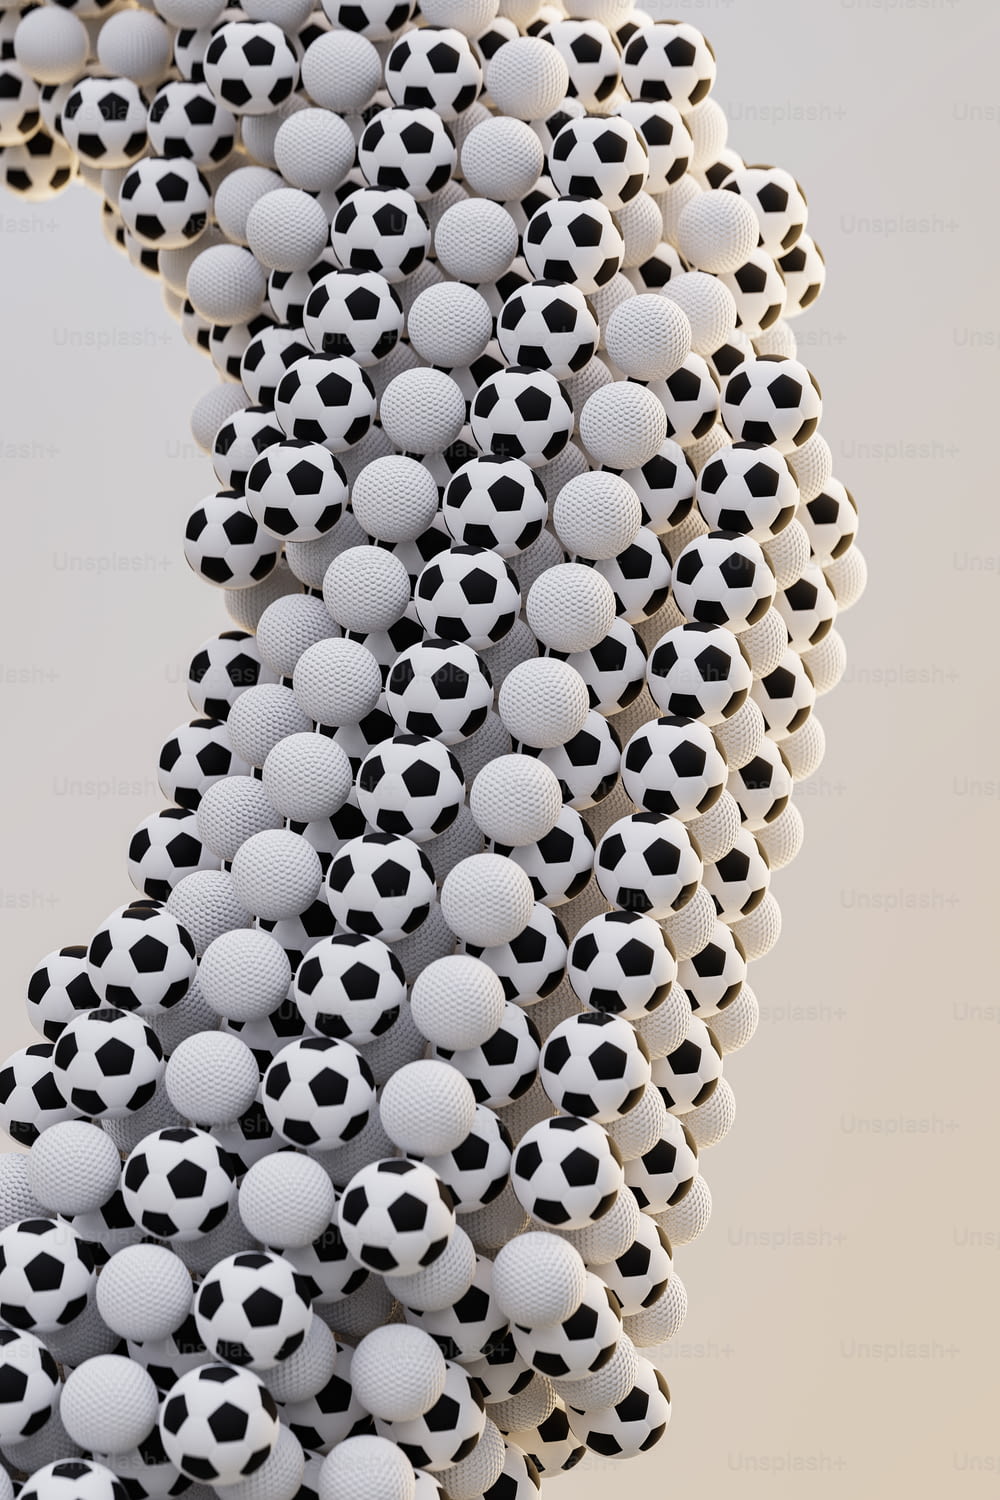 a bunch of balls that are in the shape of a number